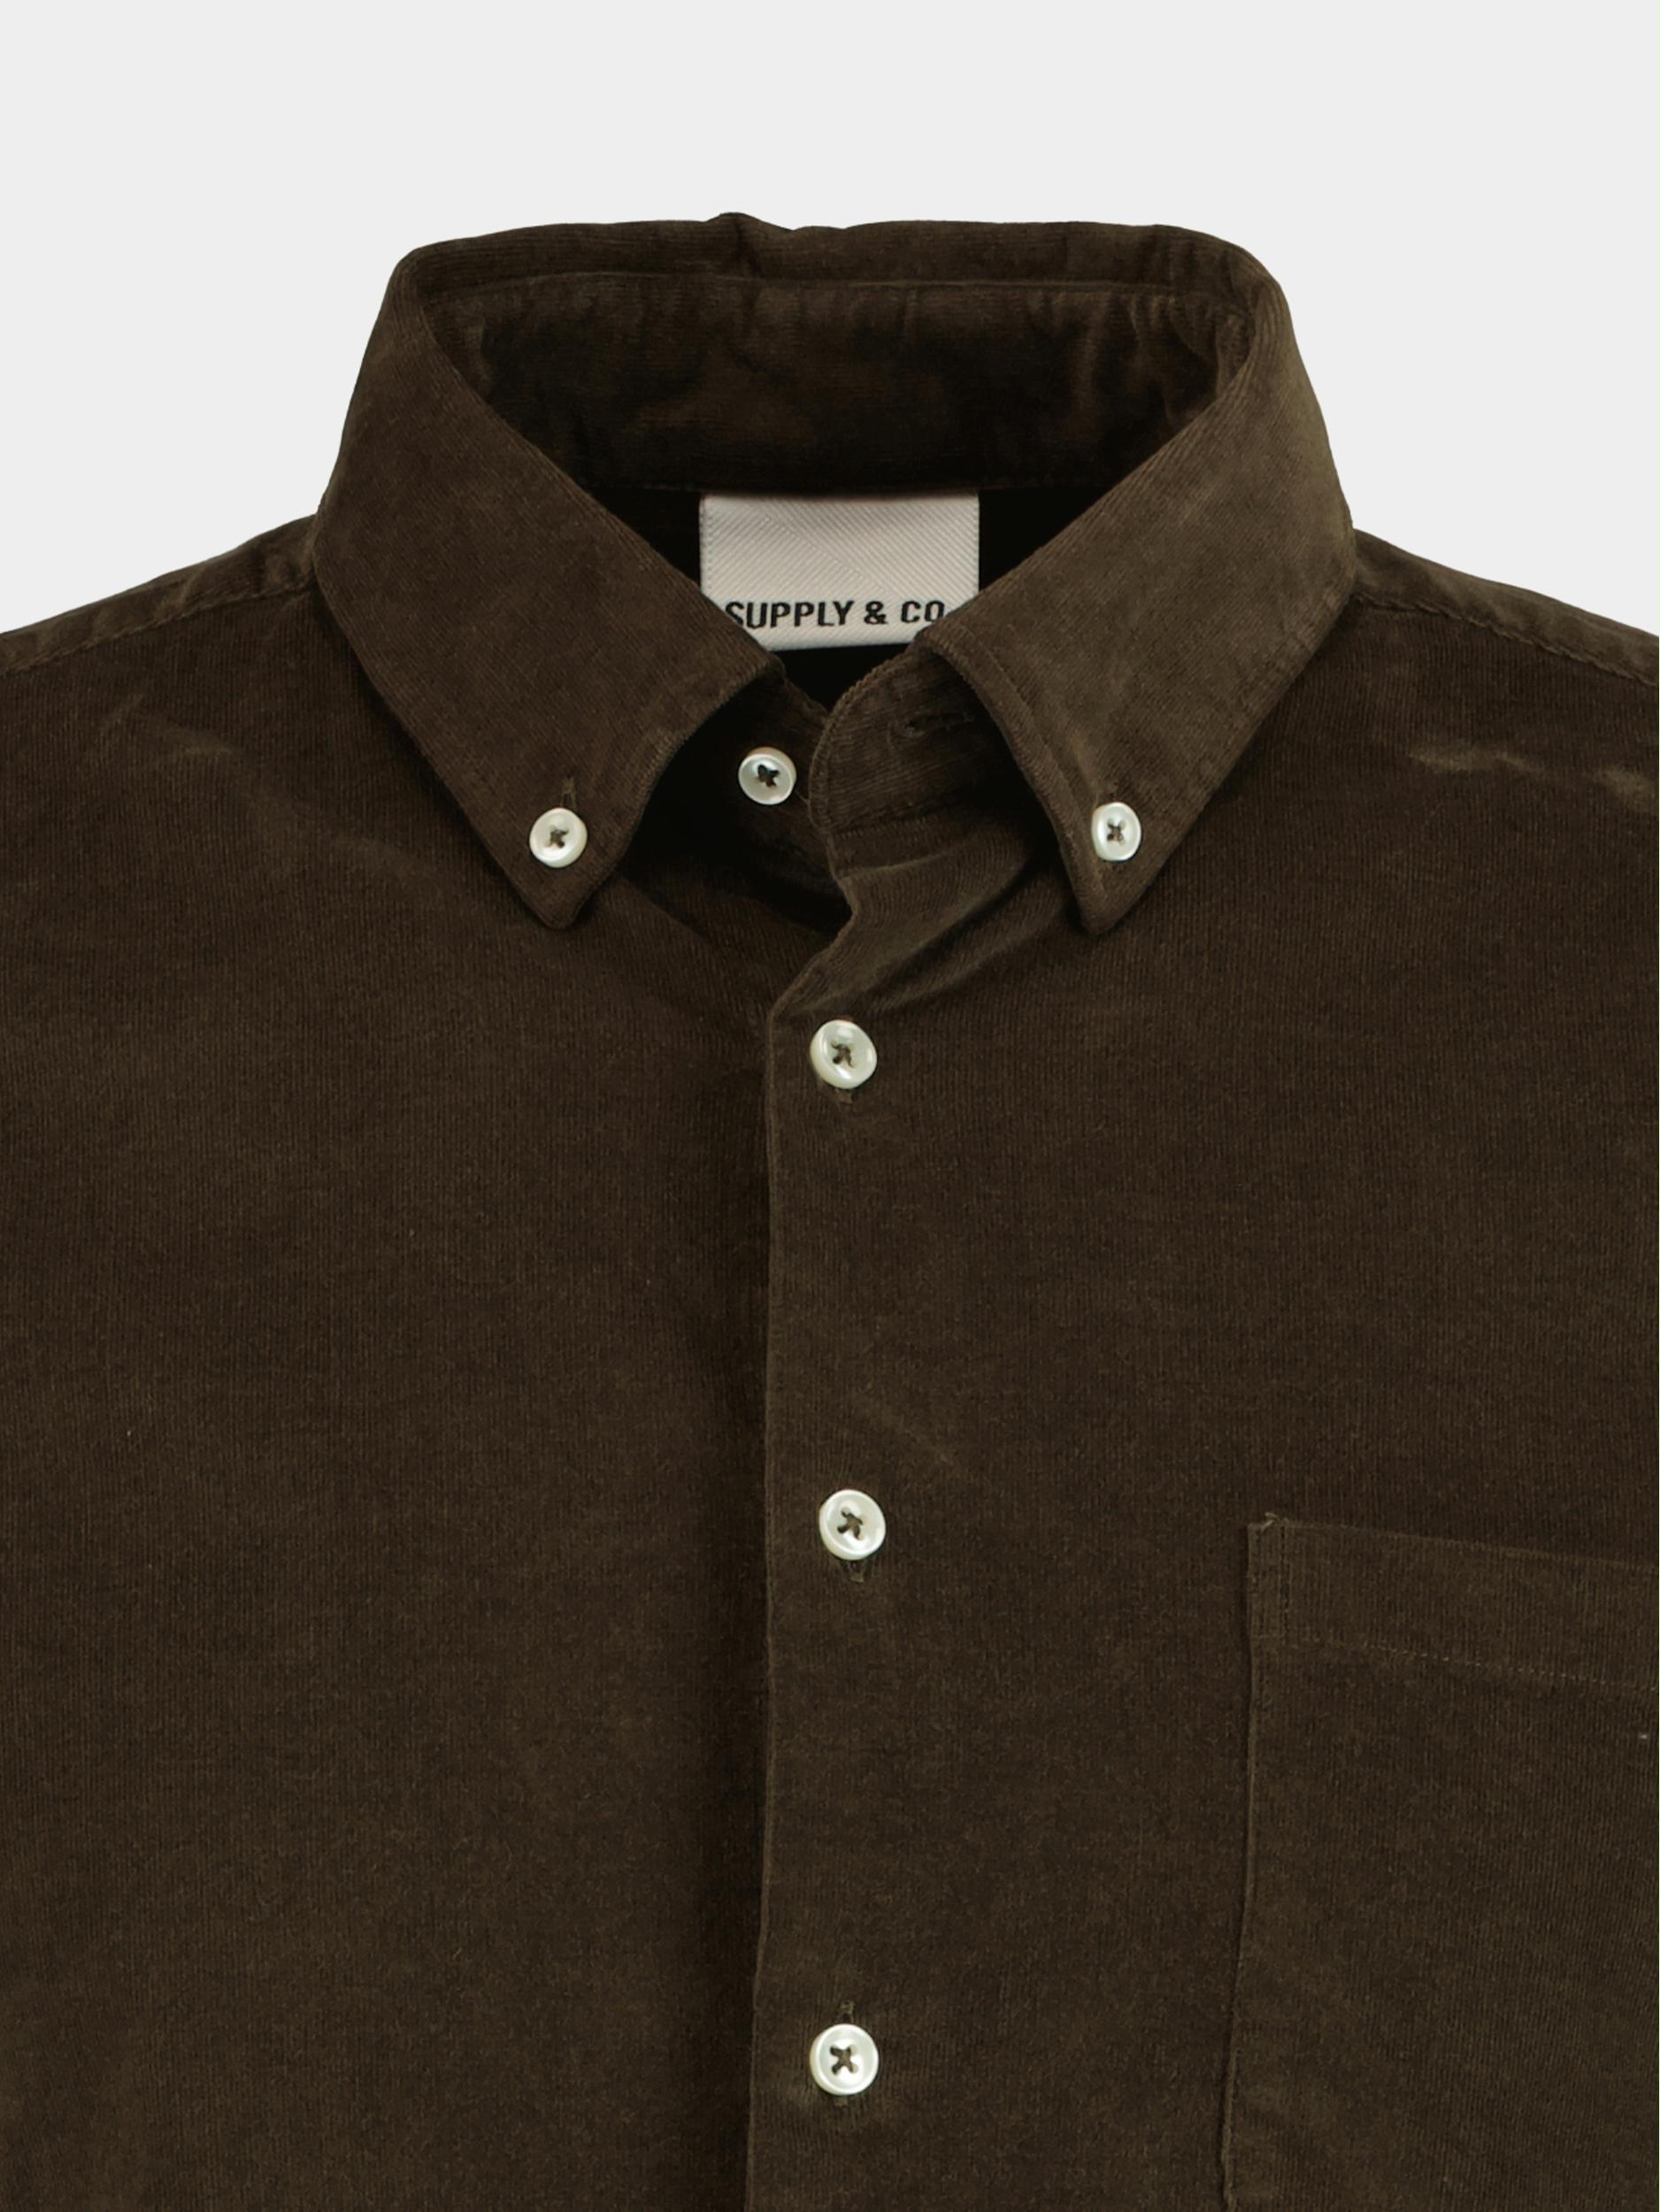 Supply & Co. Casual hemd lange mouw Groen Chen Babycord Stretch Shirt B 22307CH17/368 olive